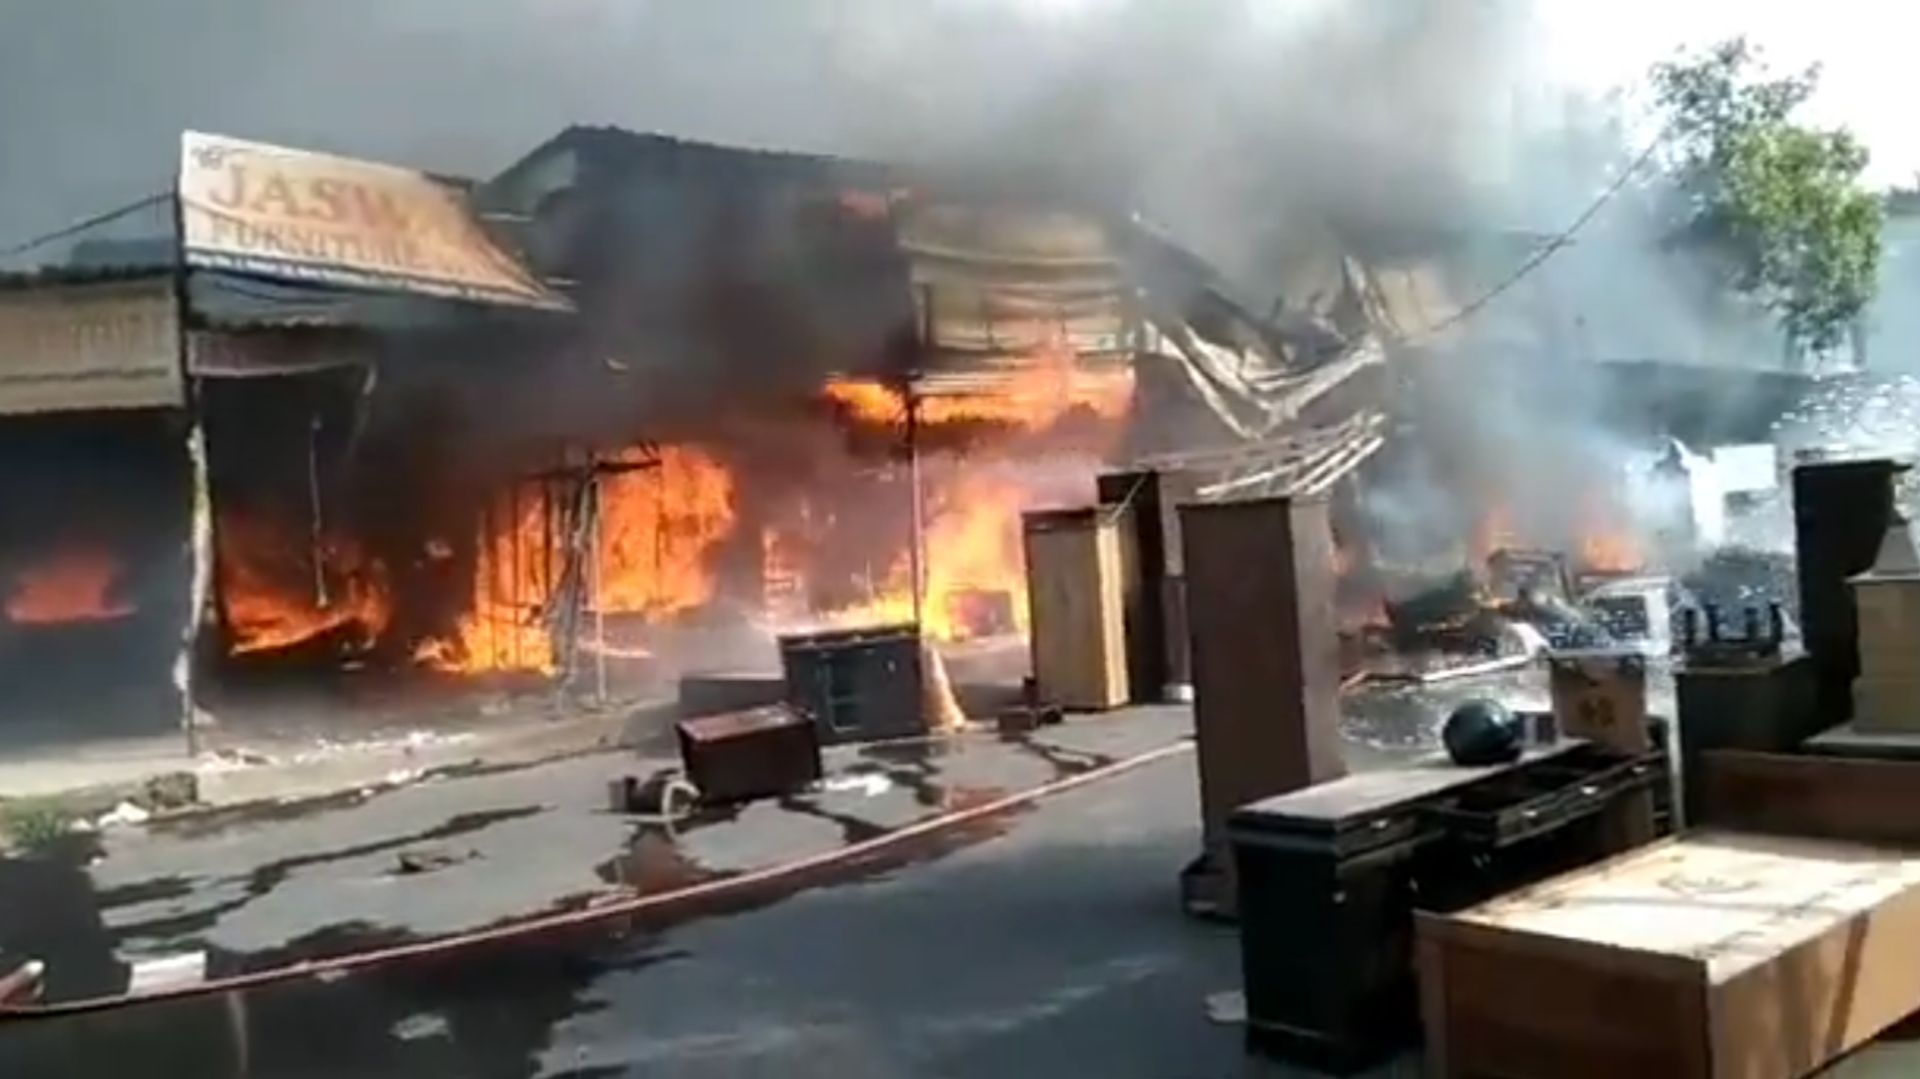 A massive fire at a furniture market in Sector 53 and 54 of Chandigarh, India - Sputnik International, 1920, 22.06.2022